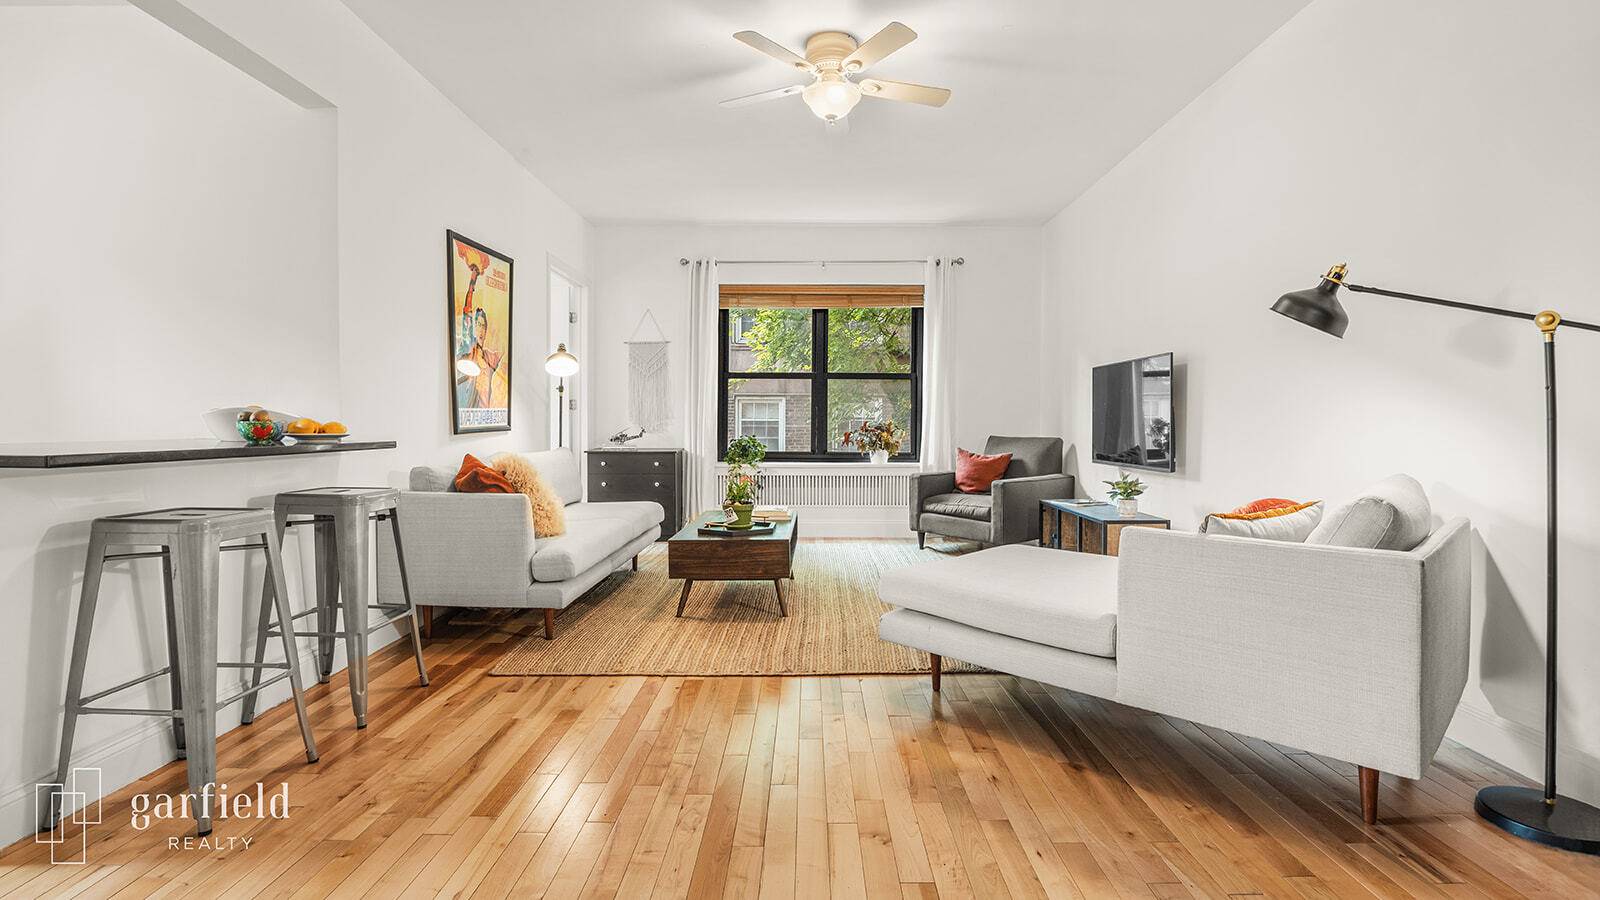 Serene, spacious, and renovated, this true two bedroom co op has windows in every room filtering southern and western sunlight through leafy views.